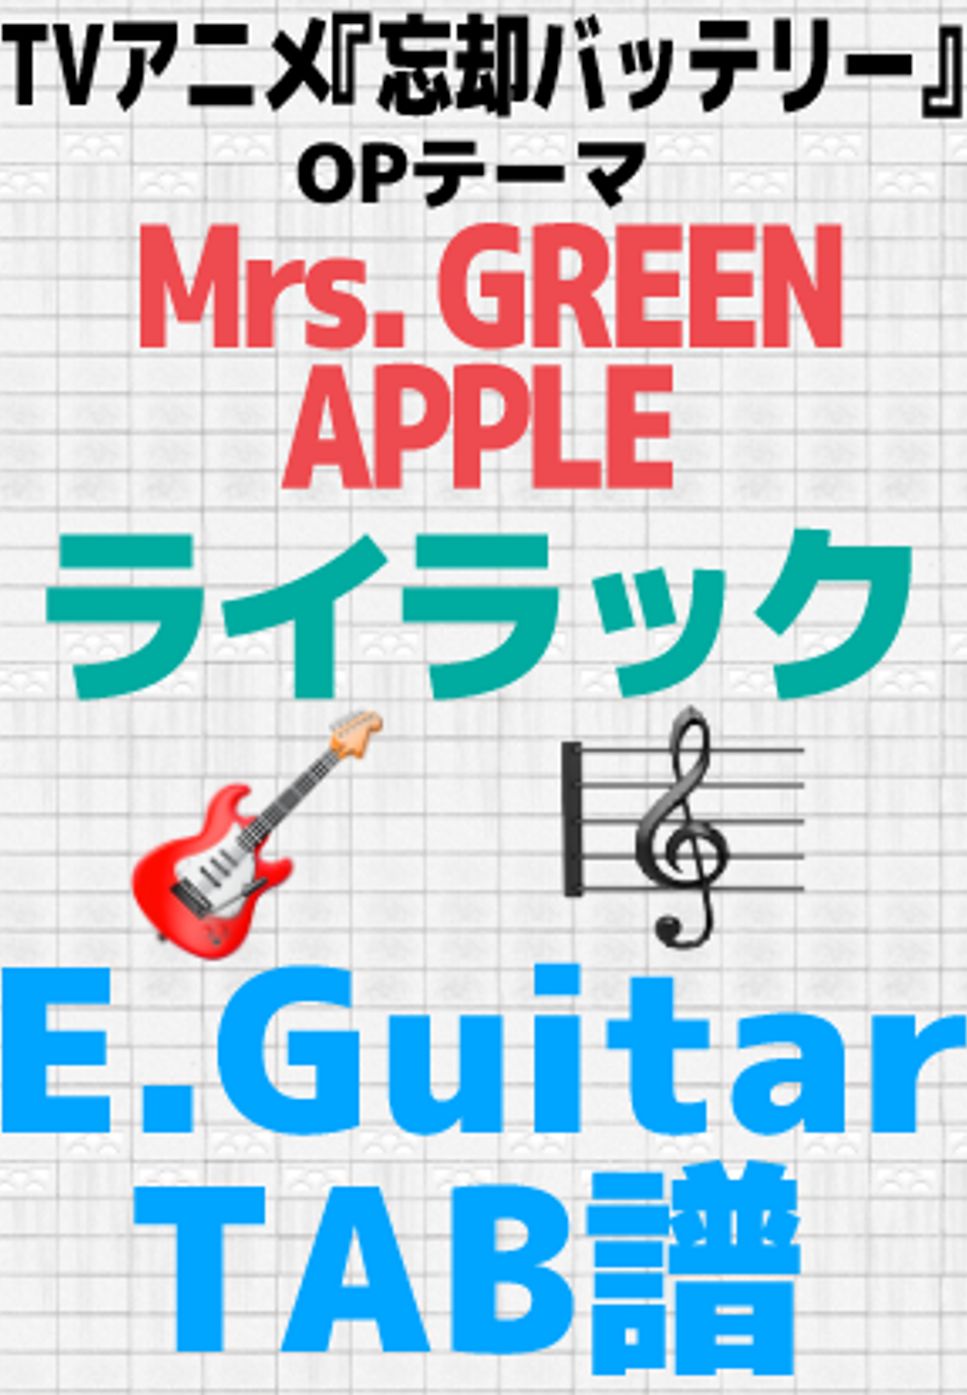 Mrs. GREEN APPLE - 【🎸TABS】ライラック- Mrs. GREEN APPLE  Guitar Cover【忘却バッテリーOP】 by GakuChannel